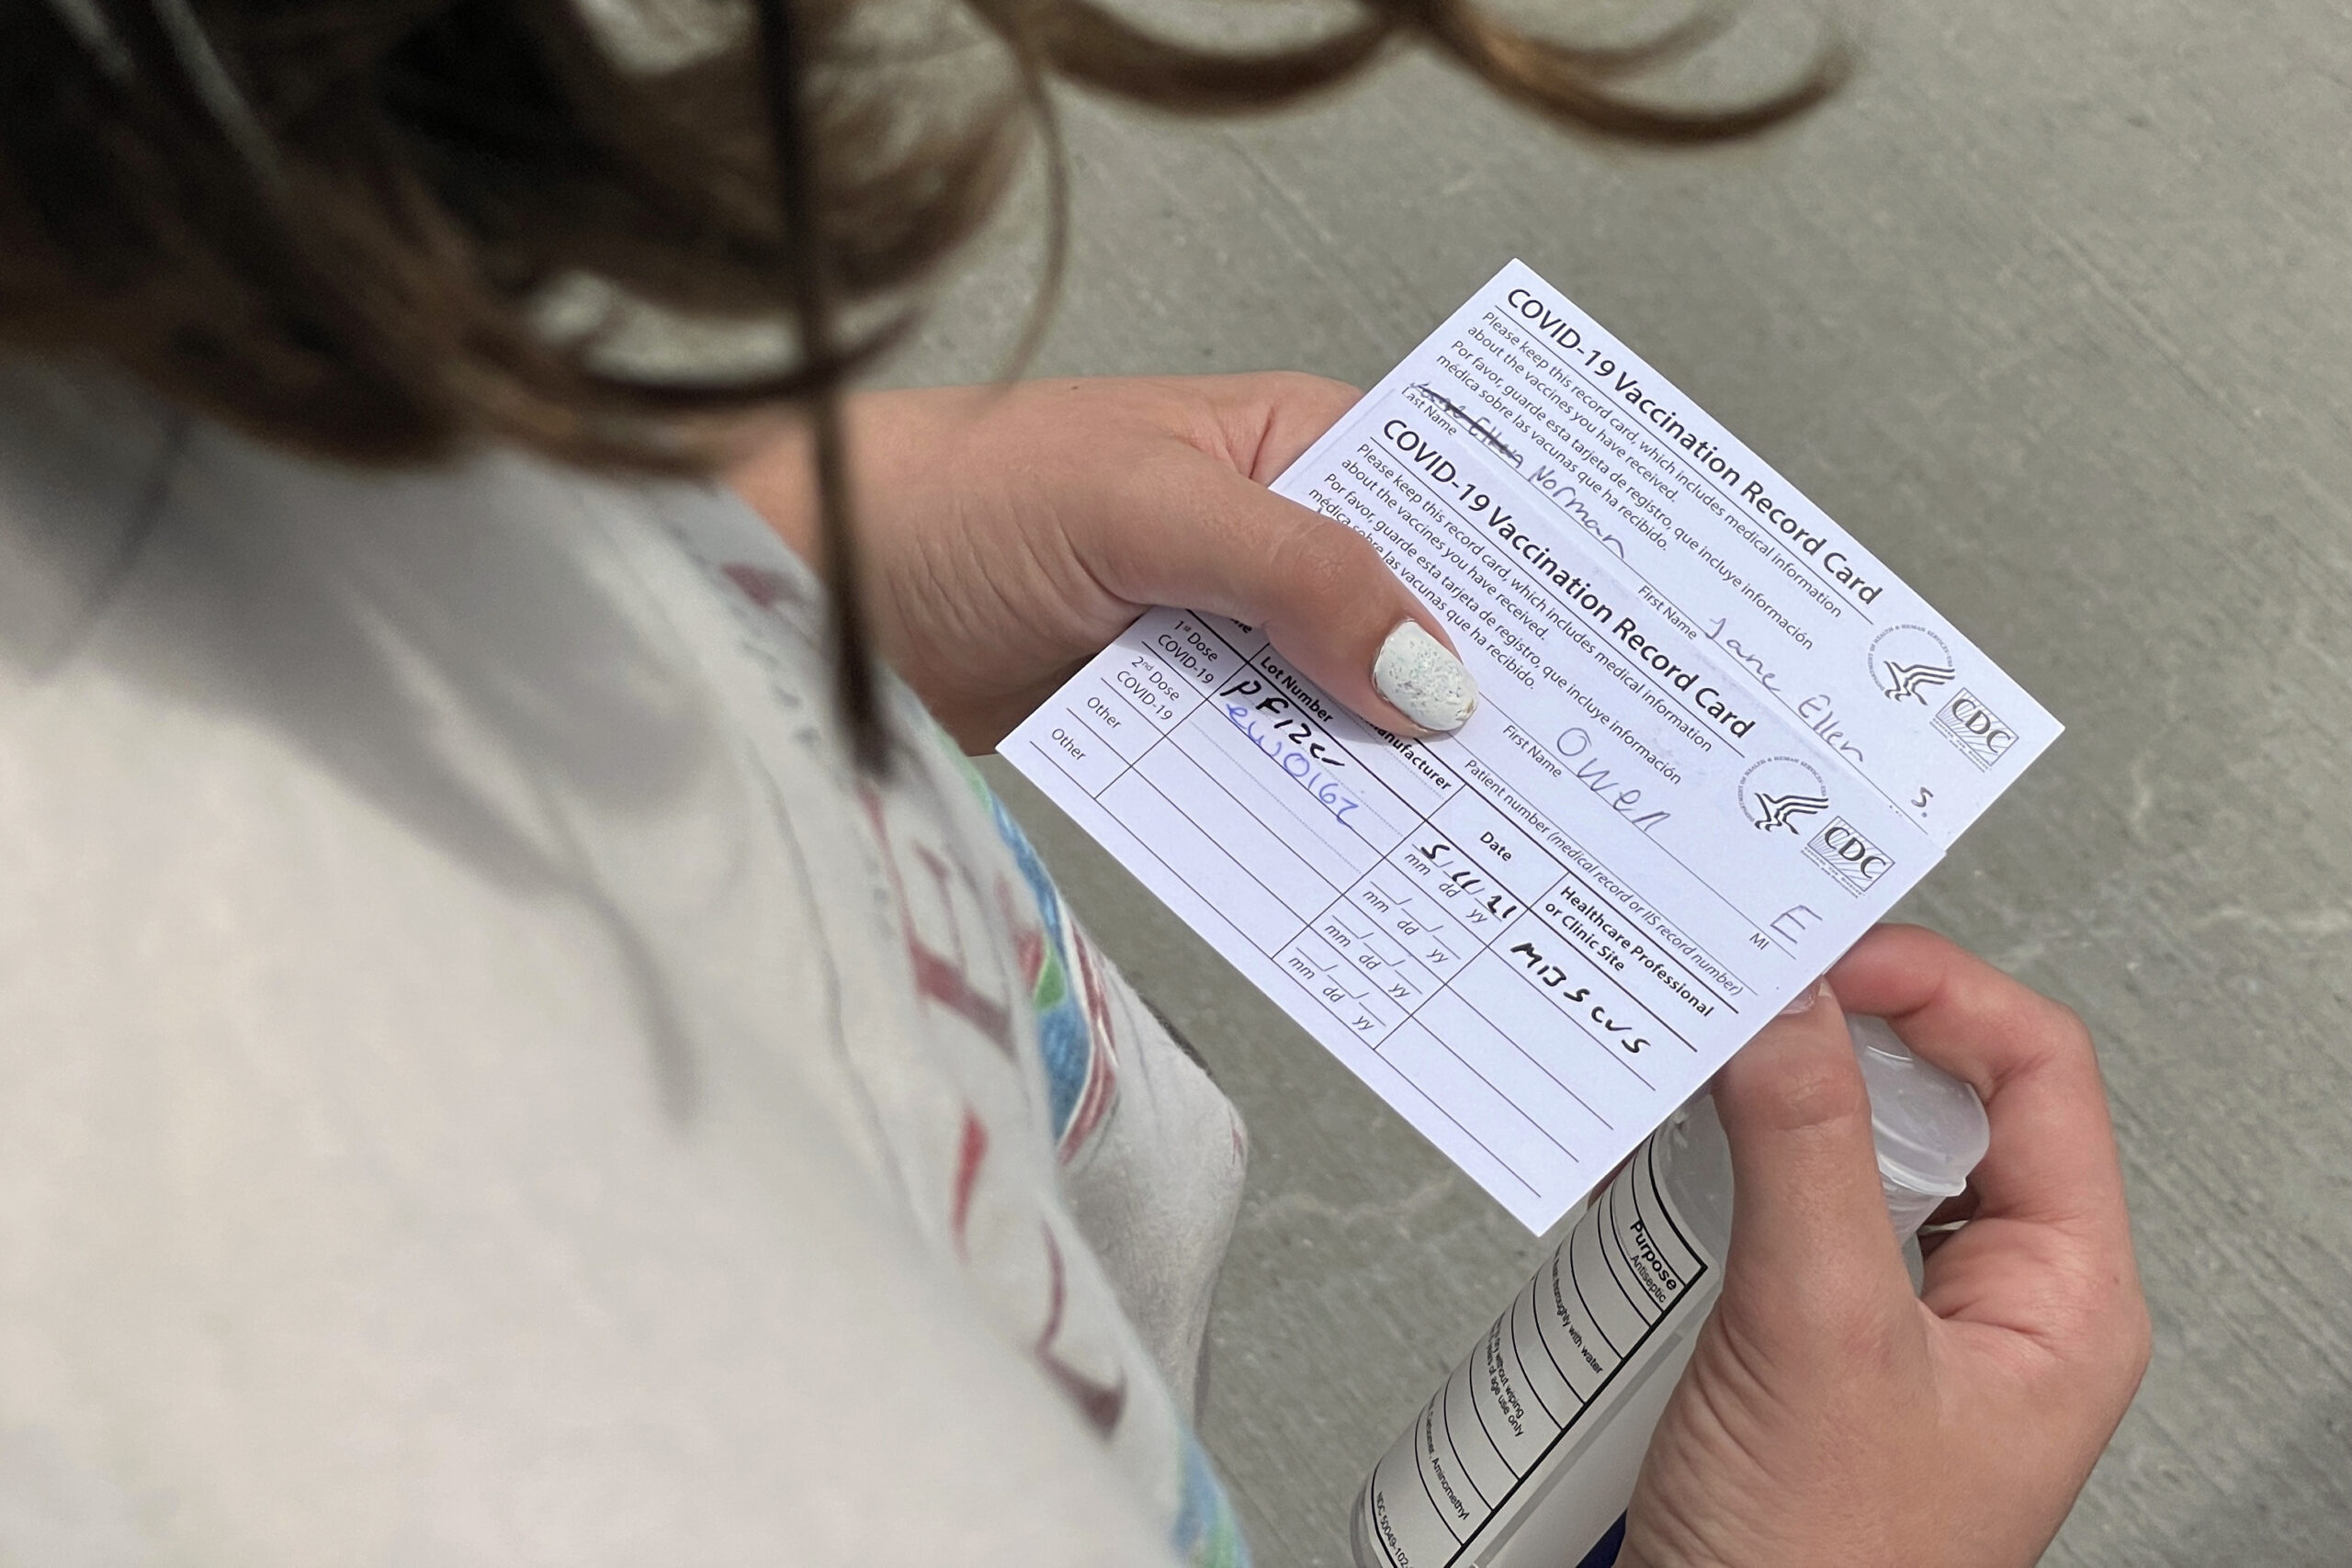 Jane Ellen Norman, 12, holds vaccination cards for her and her 14-year-old brother